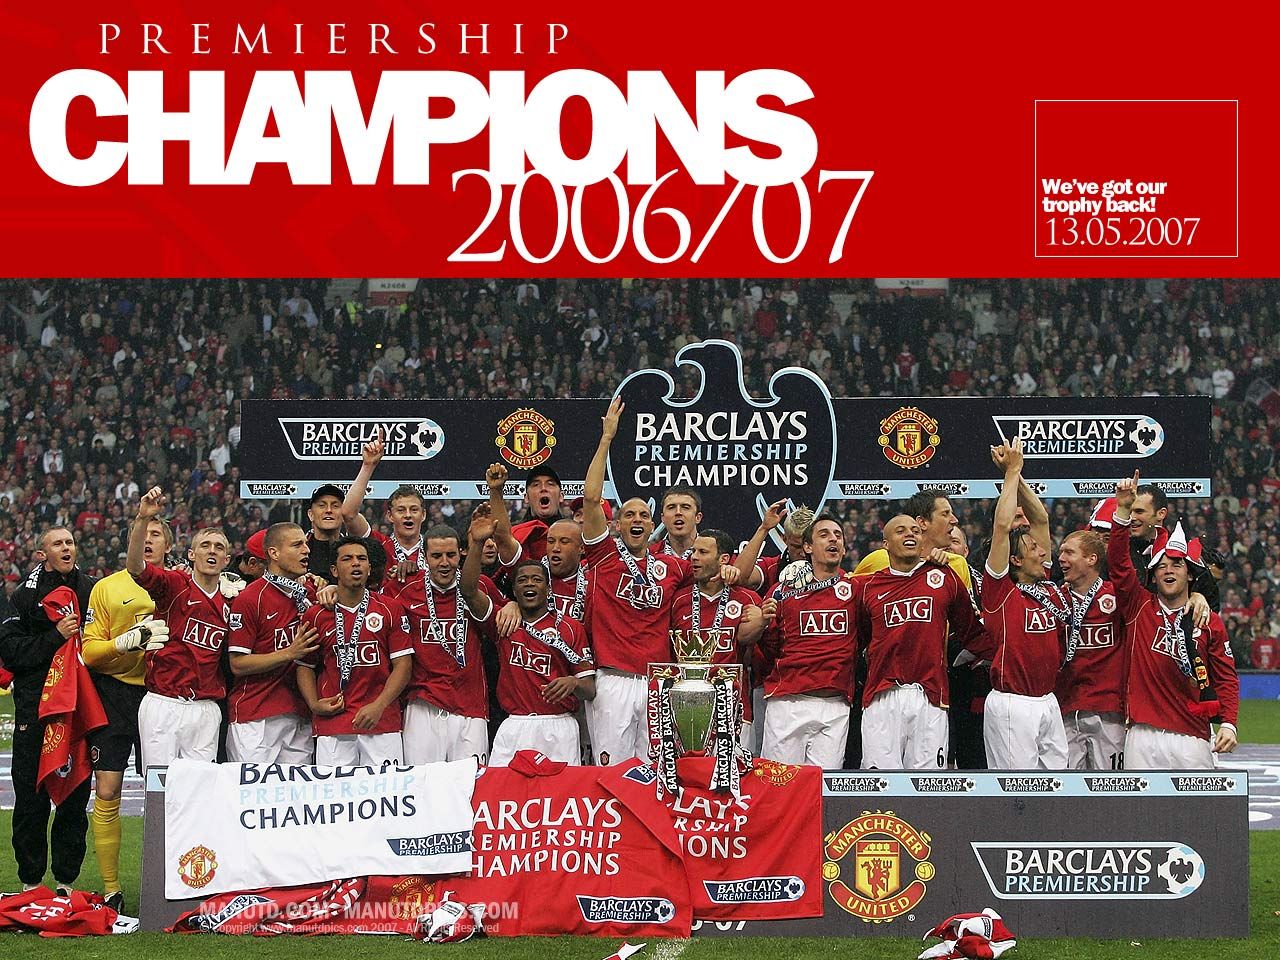 http://www.efastclick.com/images/wallpapers/manchester-united-wallpapers-mufc-3.jpg